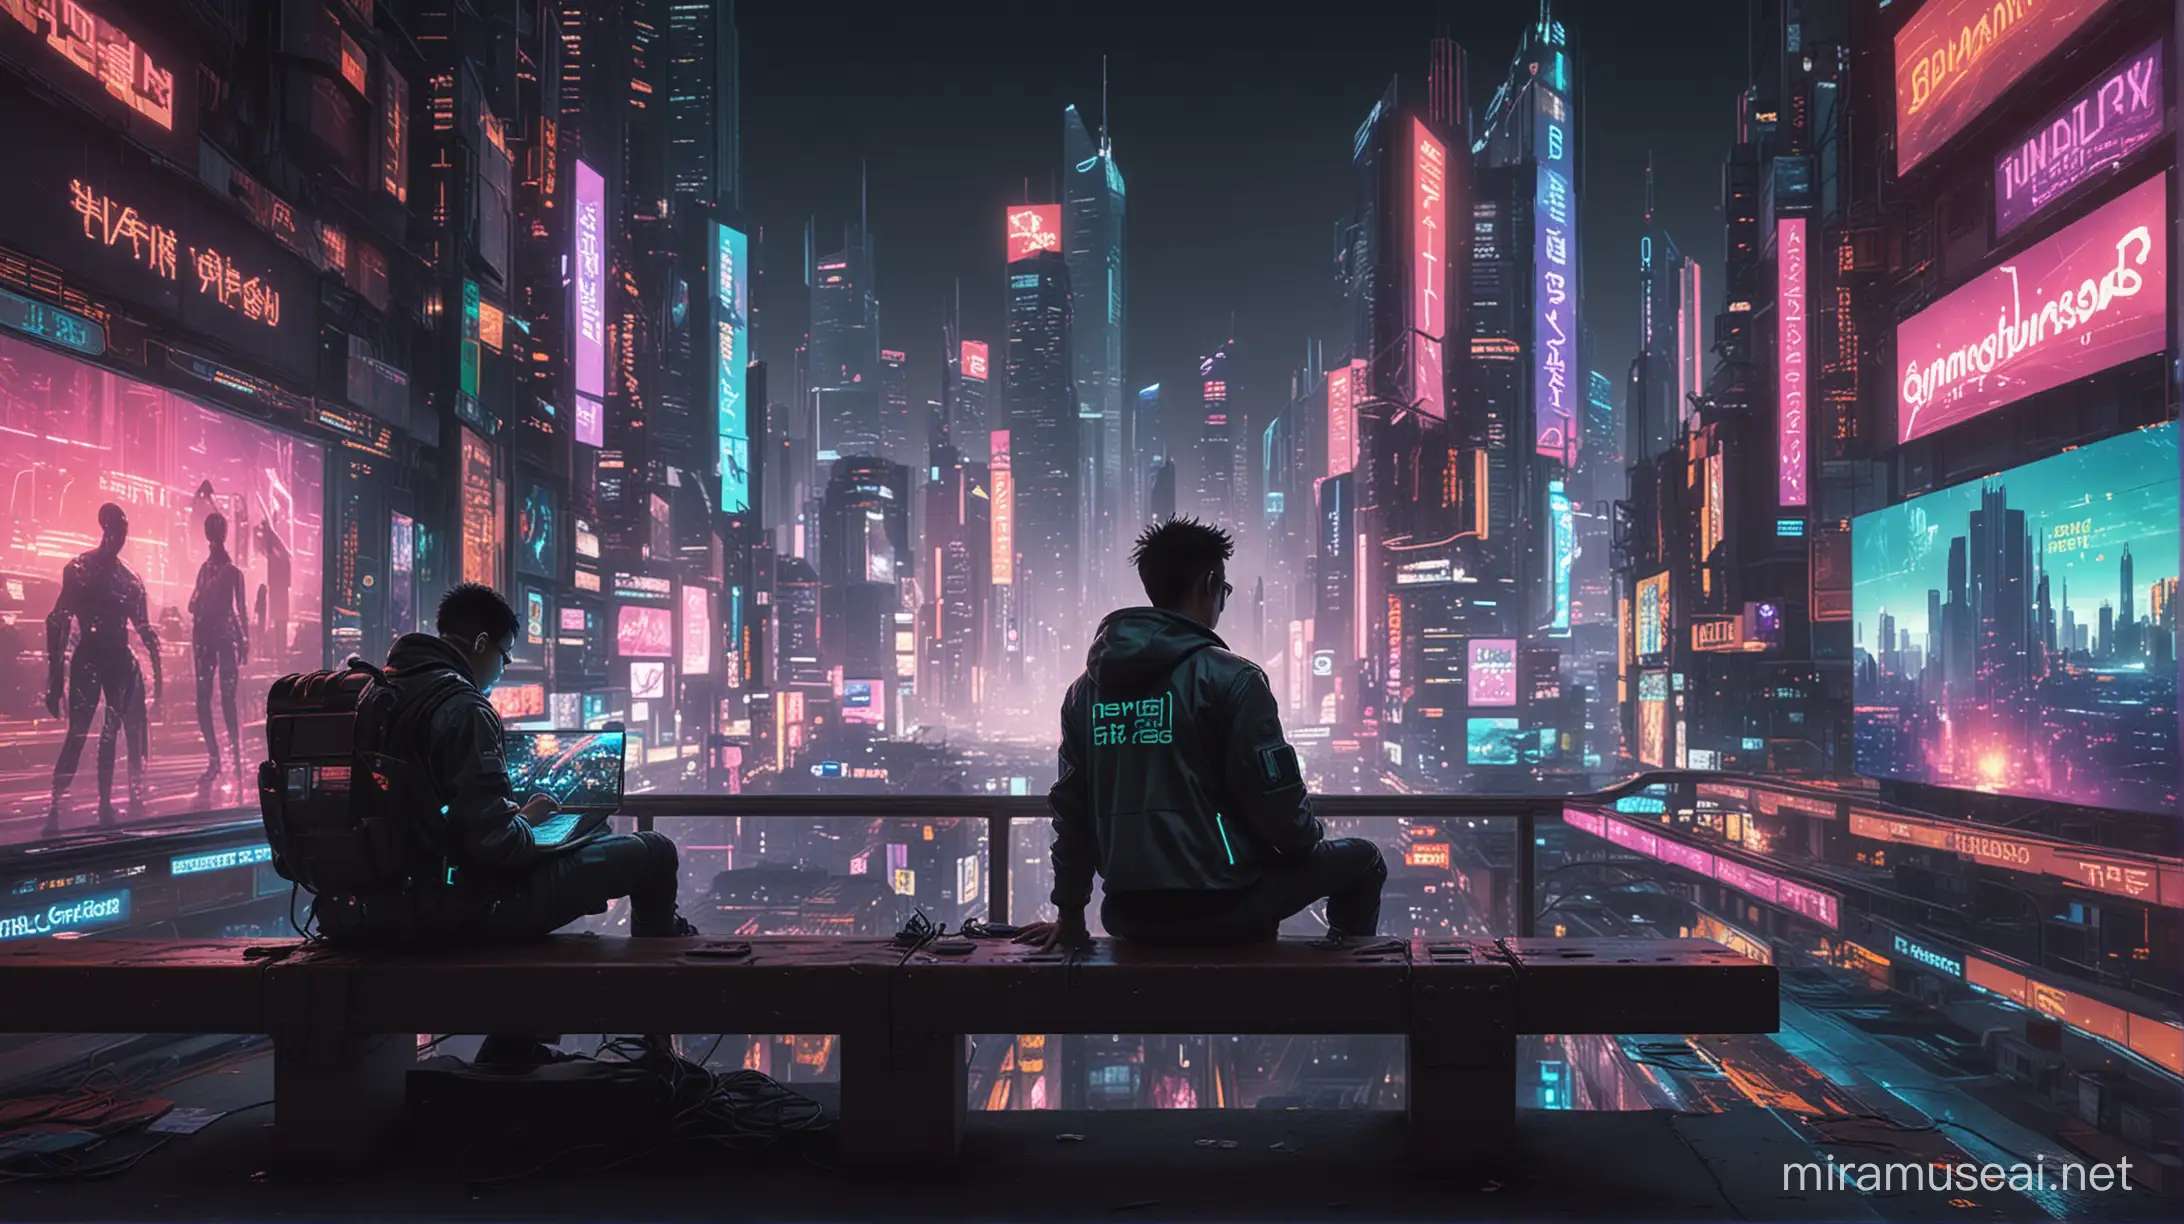 "In the heart of a neon-lit cyberpunk cityscape, where towering skyscrapers cast long shadows over crowded streets, envision a scene pulsating with digital energy and futuristic allure. Amidst the chaos of the urban jungle, a lone figure sits perched on a weathered bench, surrounded by the glow of holographic advertisements and flickering neon signs.

The figure, a young gamer boy, is dressed in cybernetic-inspired attire, with glowing circuit patterns woven into his clothing. His eyes, framed by augmented reality lenses, are fixed on a transparent laptop resting on his lap. The laptop hums softly with activity, its sleek surface revealing the intricate circuitry and glowing neon lights within.

As the boy's fingers dance across the translucent keys of the laptop, the holographic interface projects a virtual world of endless possibility and adventure. His face is illuminated by the soft glow of the laptop screen, reflecting the vibrant colors and dynamic visuals of the digital realm.

Behind him, the city skyline glimmers with the neon glow of countless advertisements and holographic projections, casting a surreal backdrop against the darkened sky. Each sign tells a story of its own, with retro-futuristic designs and glowing typography that evoke a sense of nostalgia and wonder.

In this cyberpunk dreamscape, the gamer boy is a digital explorer, navigating the virtual landscape with skill and determination. As he delves deeper into the digital abyss, his surroundings fade away, and he is consumed by the boundless possibilities of the cybernetic realm.

Etched into the holographic display in a cool and stylish font, the words 'What's Next' shimmer with an otherworldly glow, beckoning the viewer to join the young gamer on his journey into the unknown."

